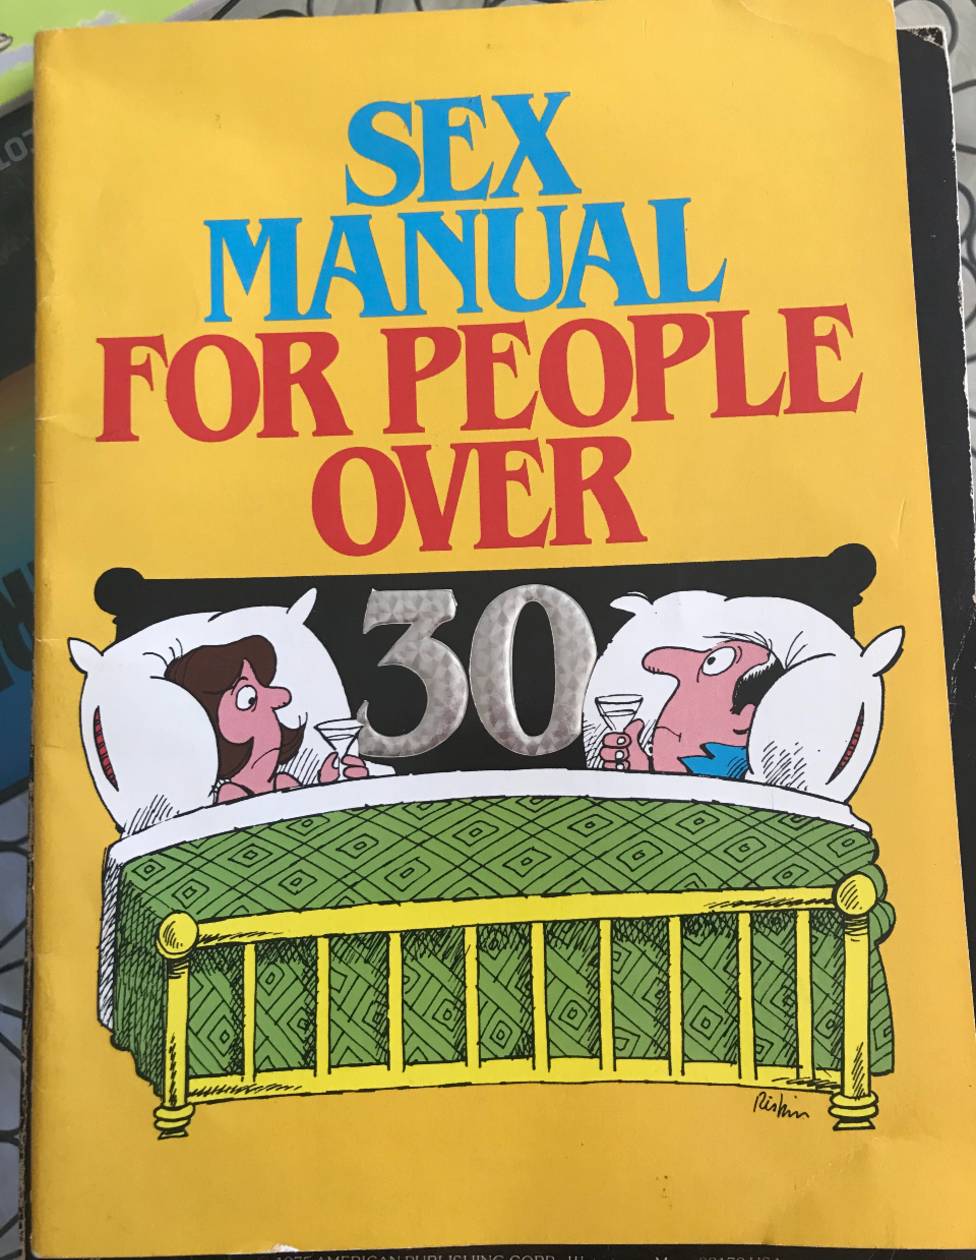 Sex Manual for People Over 30 by Ira Alterman